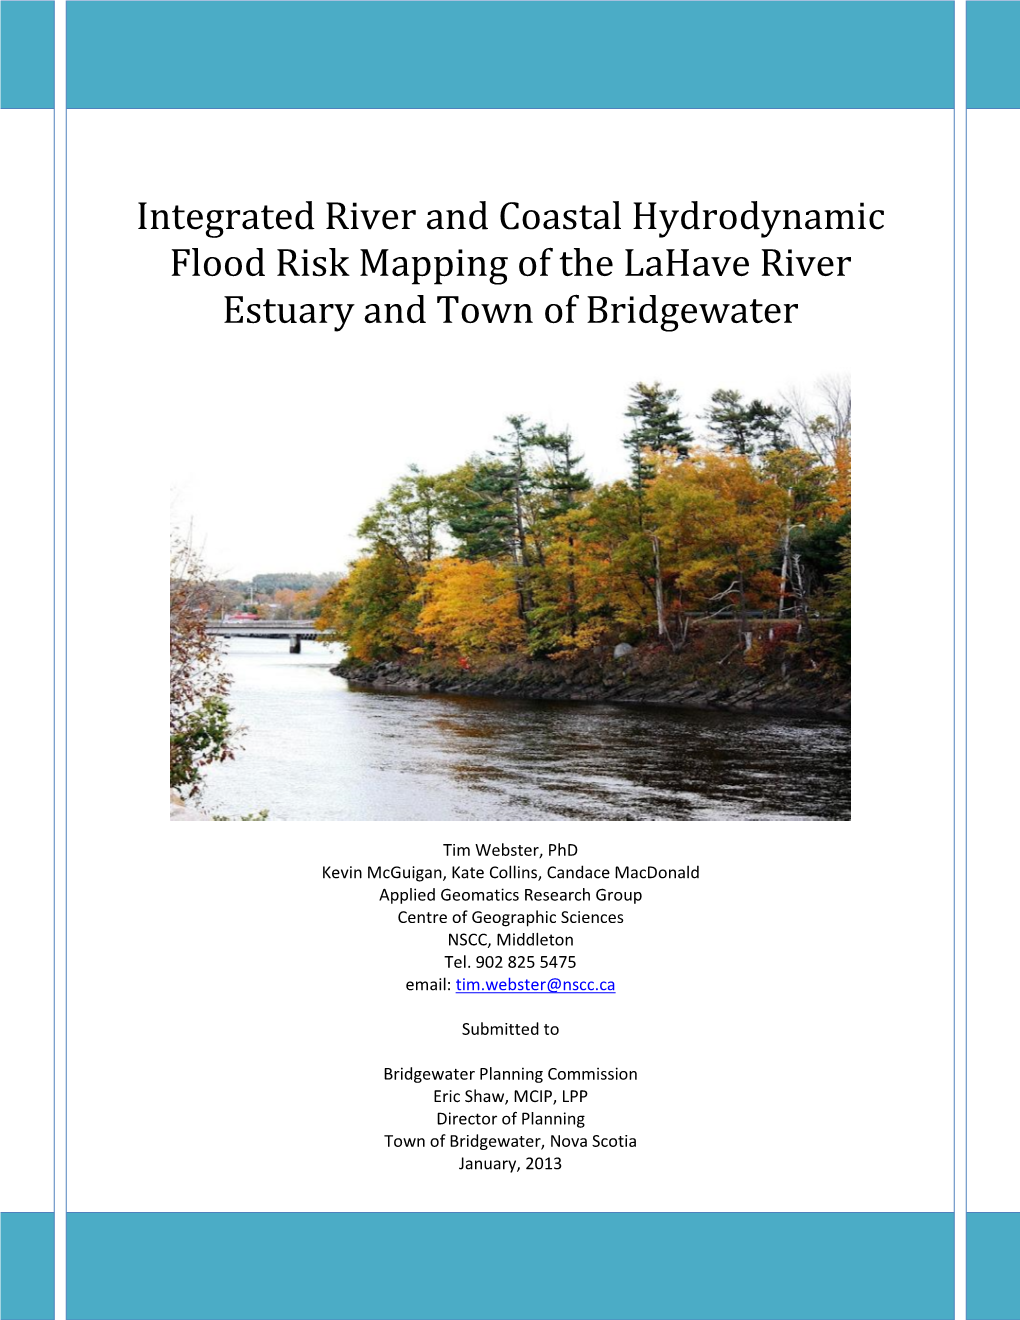 Integrated River and Coastal Hydrodynamic Flood Risk Mapping of the Lahave River Estuary and Town of Bridgewater